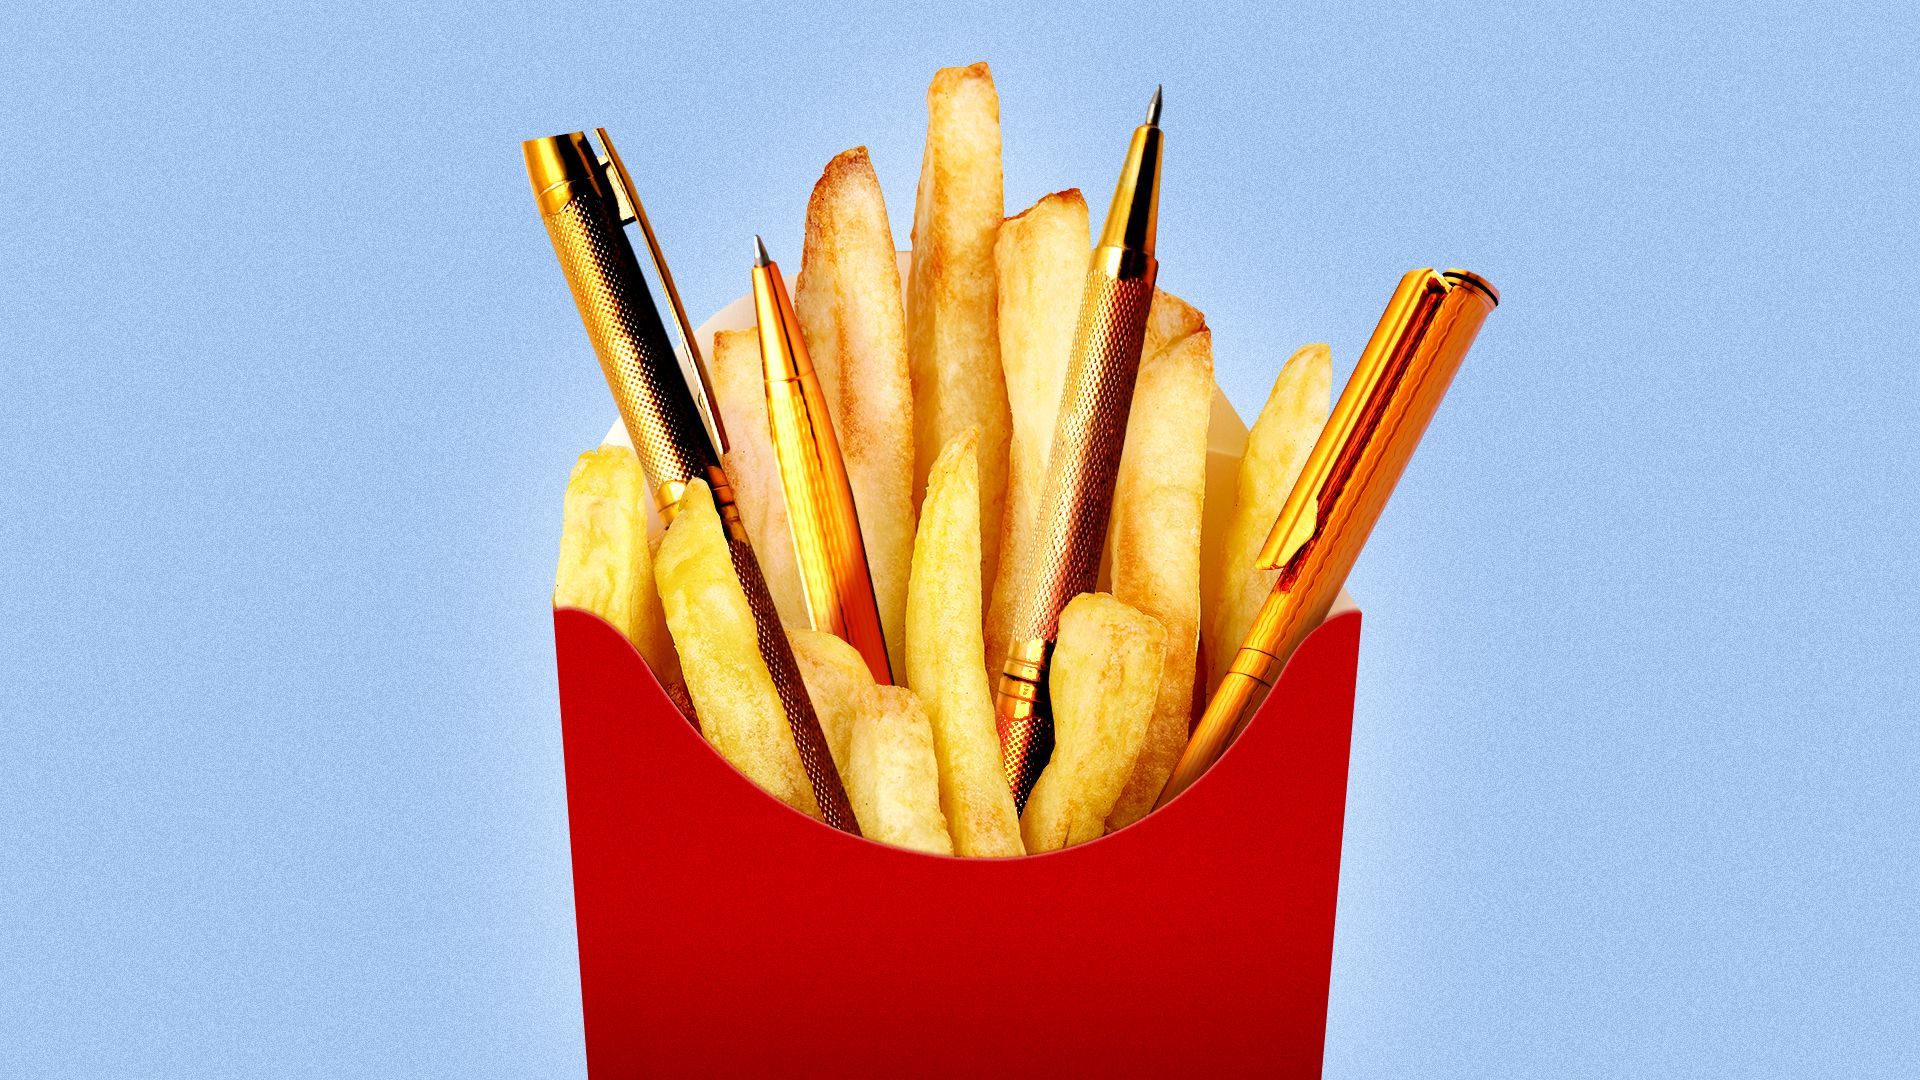 Illustration of a red carton of french fries with four golden pens scattered amongst the fries.